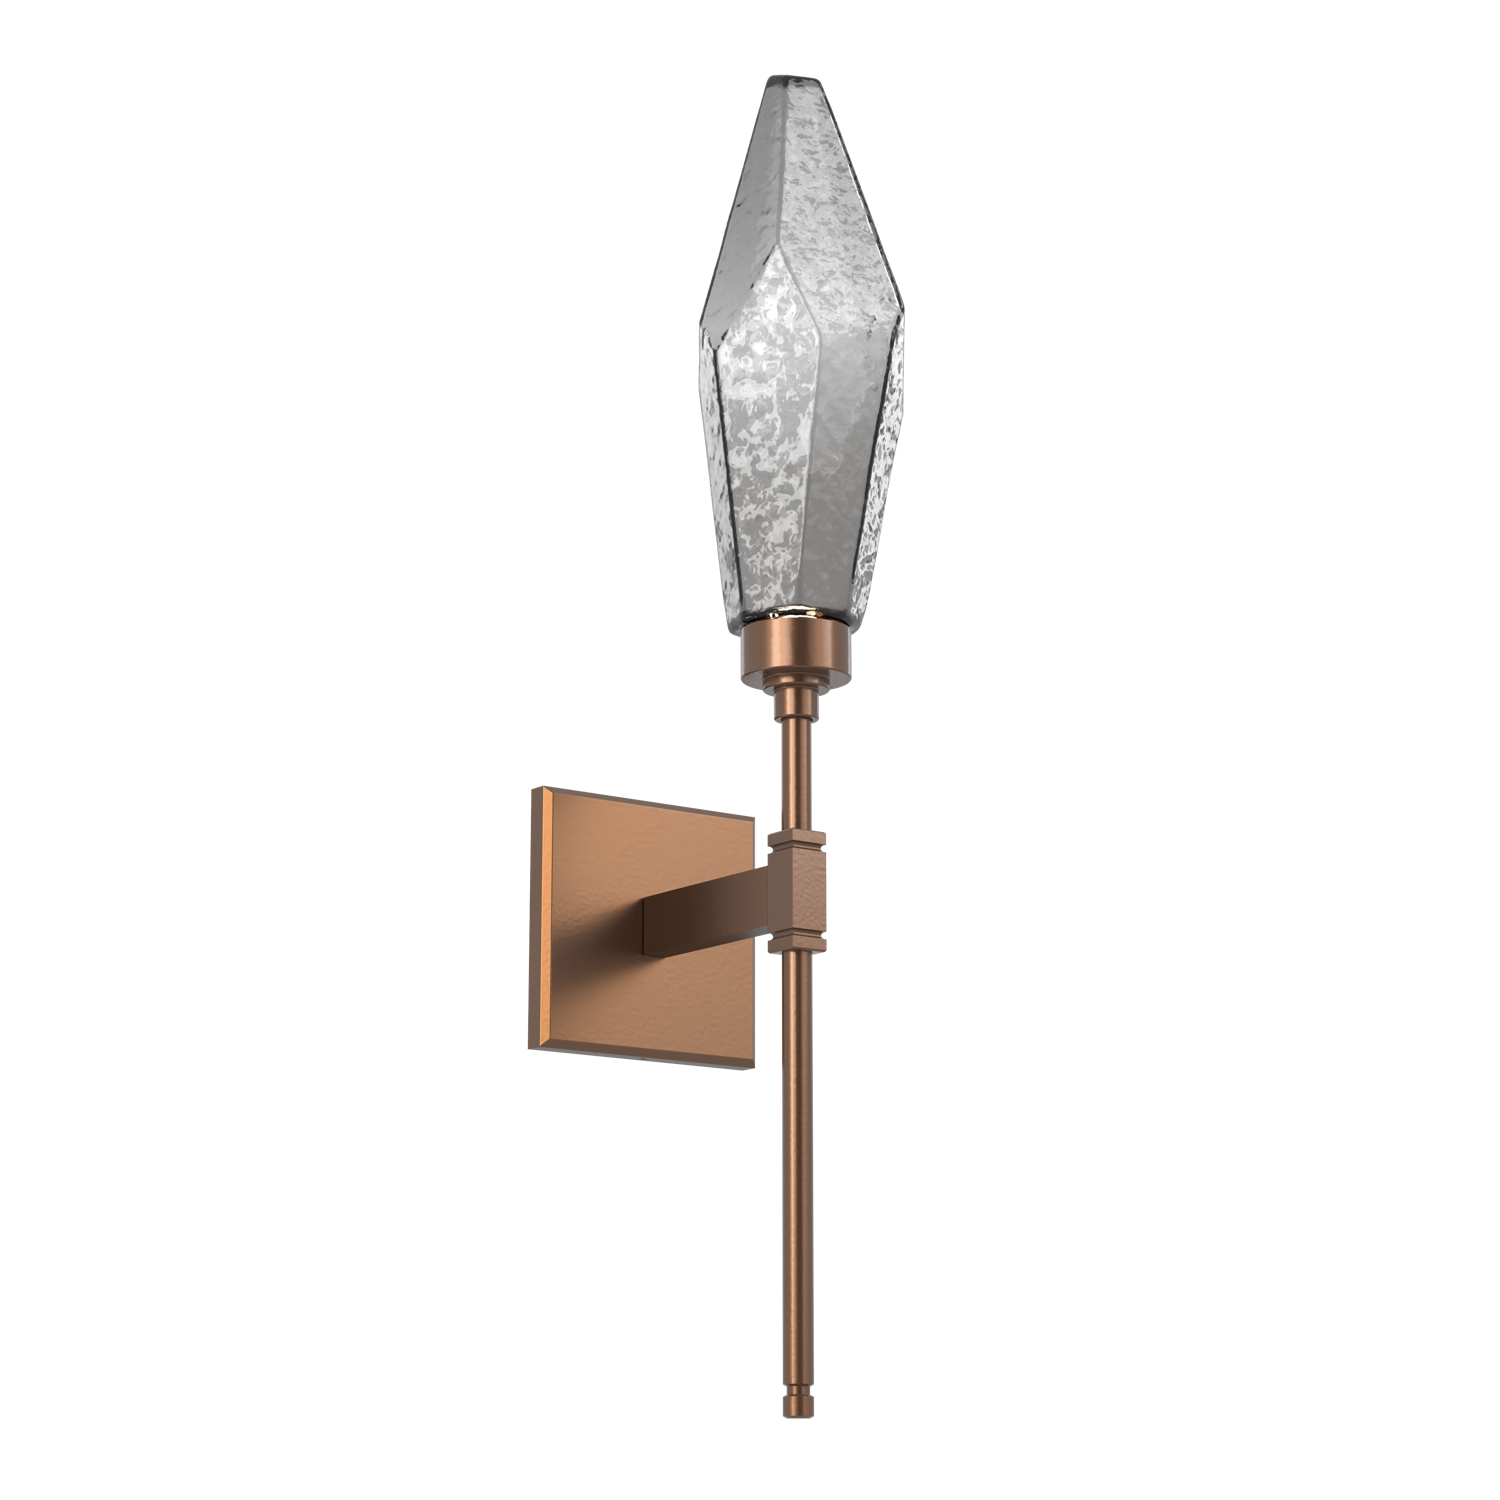 IDB0050-07-BB-CS-Hammerton-Studio-Rock-Crystal-belvedere-wall-sconce-with-burnished-bronze-finish-and-chilled-smoke-glass-shades-and-LED-lamping